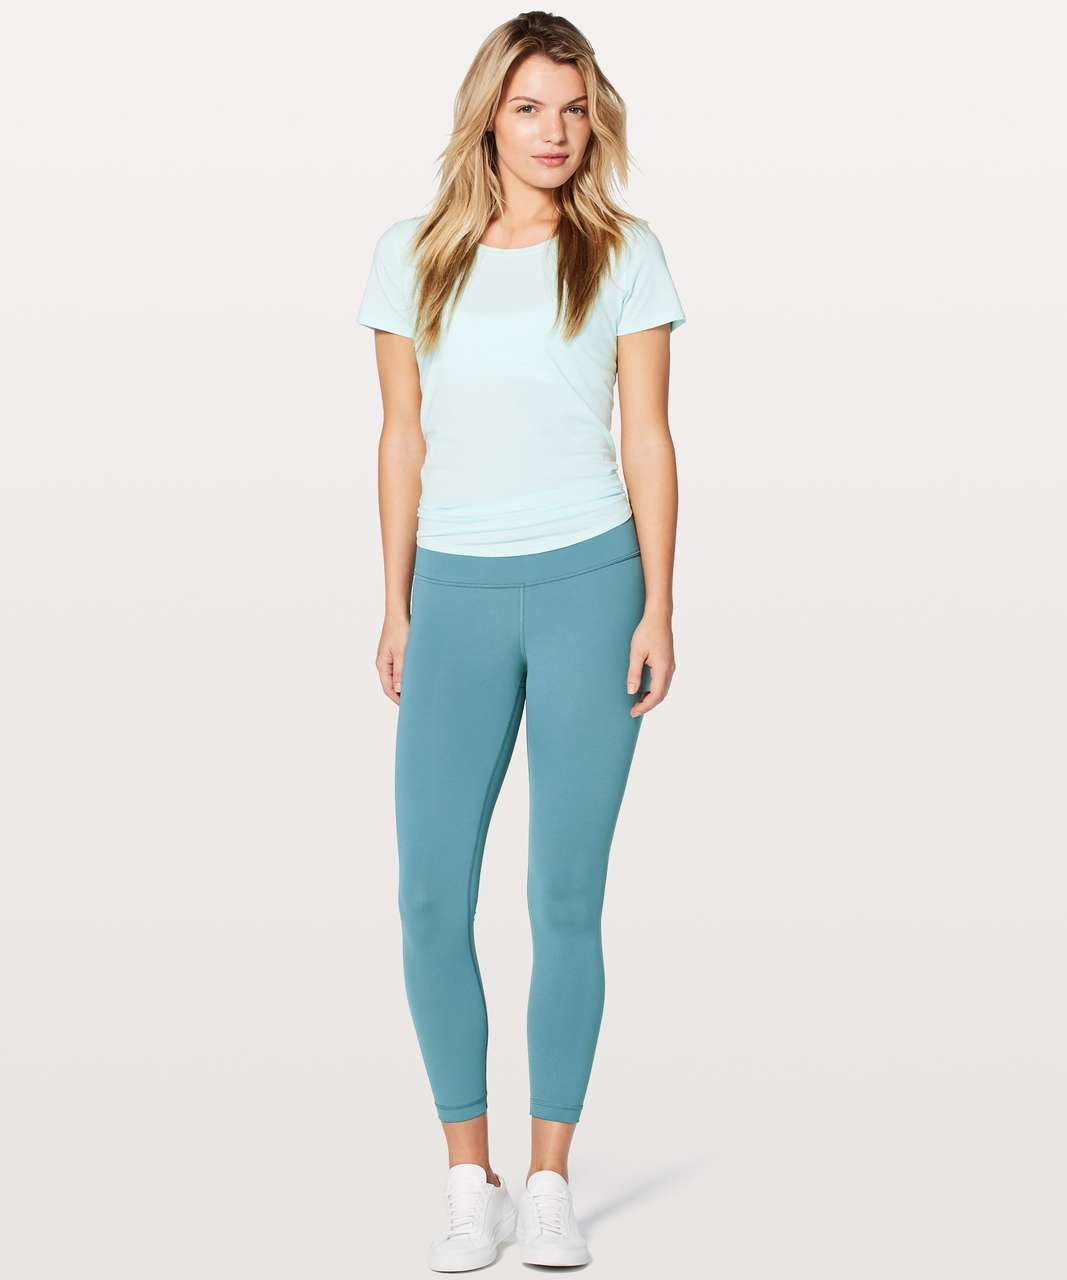 Lululemon Wunder Under High-rise 7/8 Tight *luxtreme 25 In